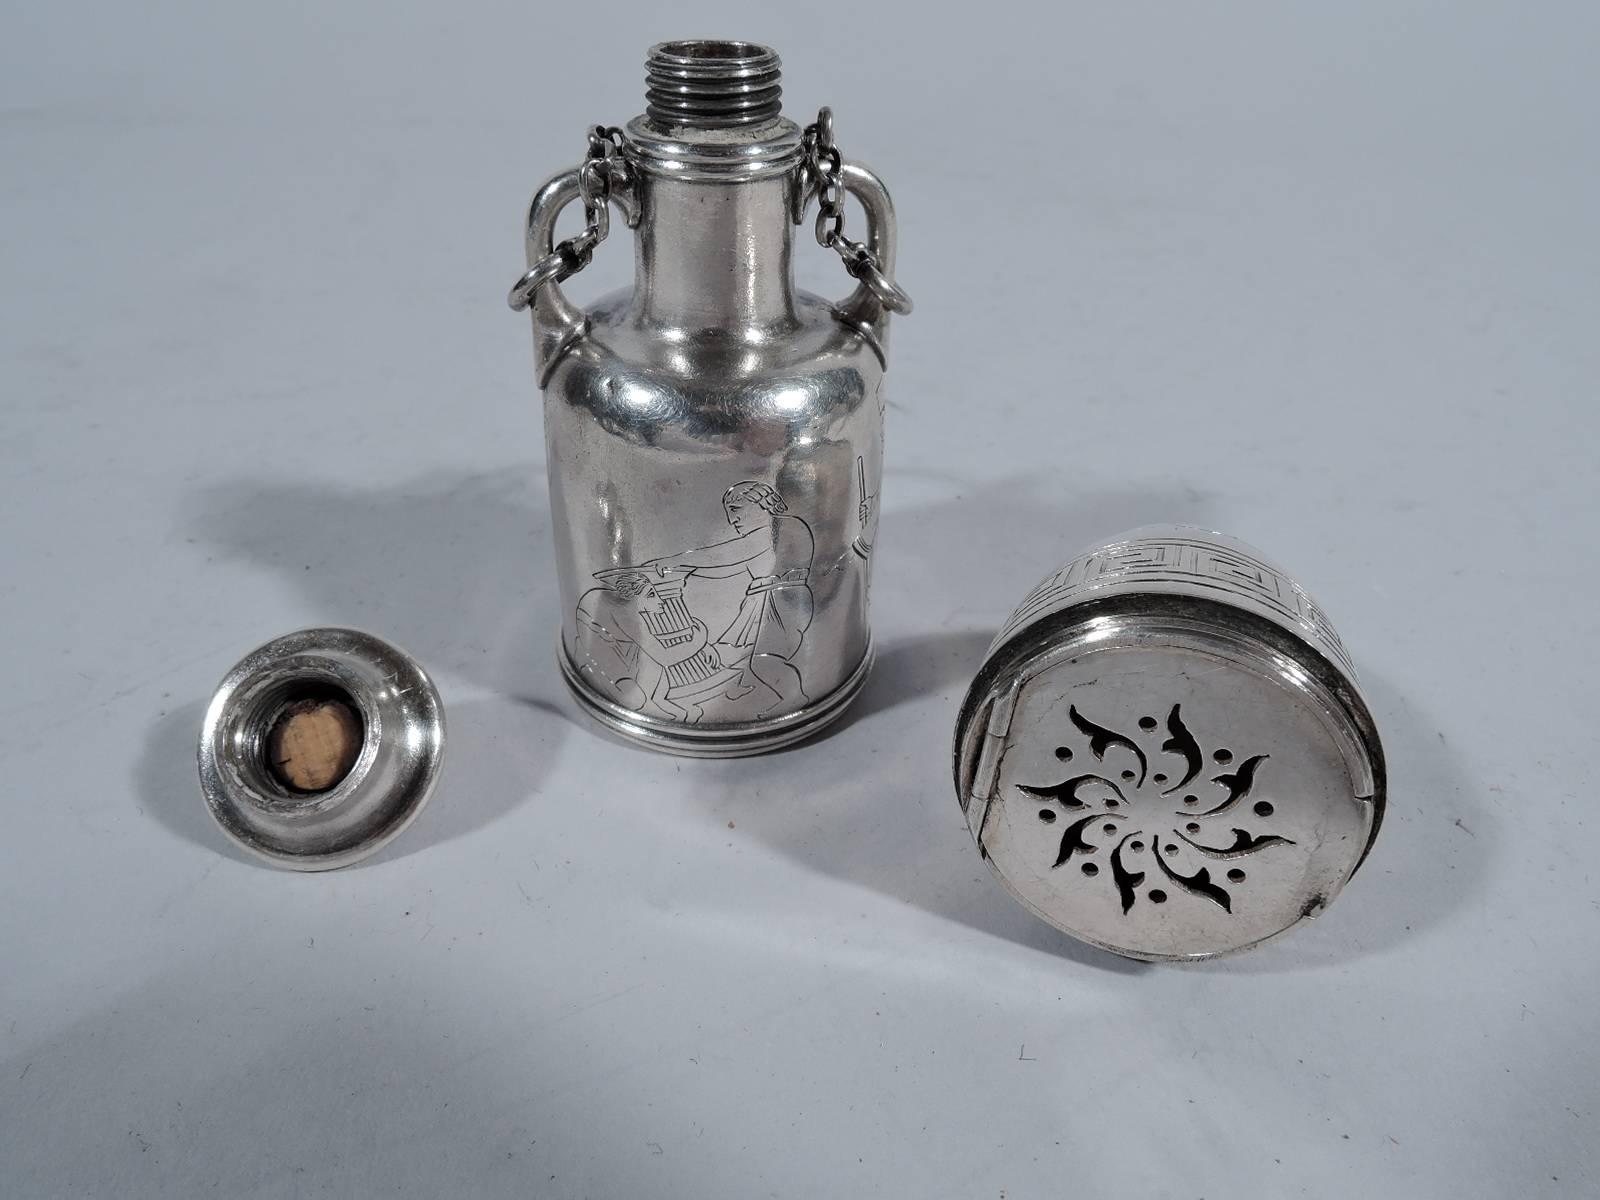 Greek Revival sterling silver perfume and vinaigrette. Made by Tiffany & Co. in New York. Amphora vessel engraved with classical figures and fretwork suggestive of an ancient vase. Threaded and cork-lined cover. Bottom threaded and has hinged and